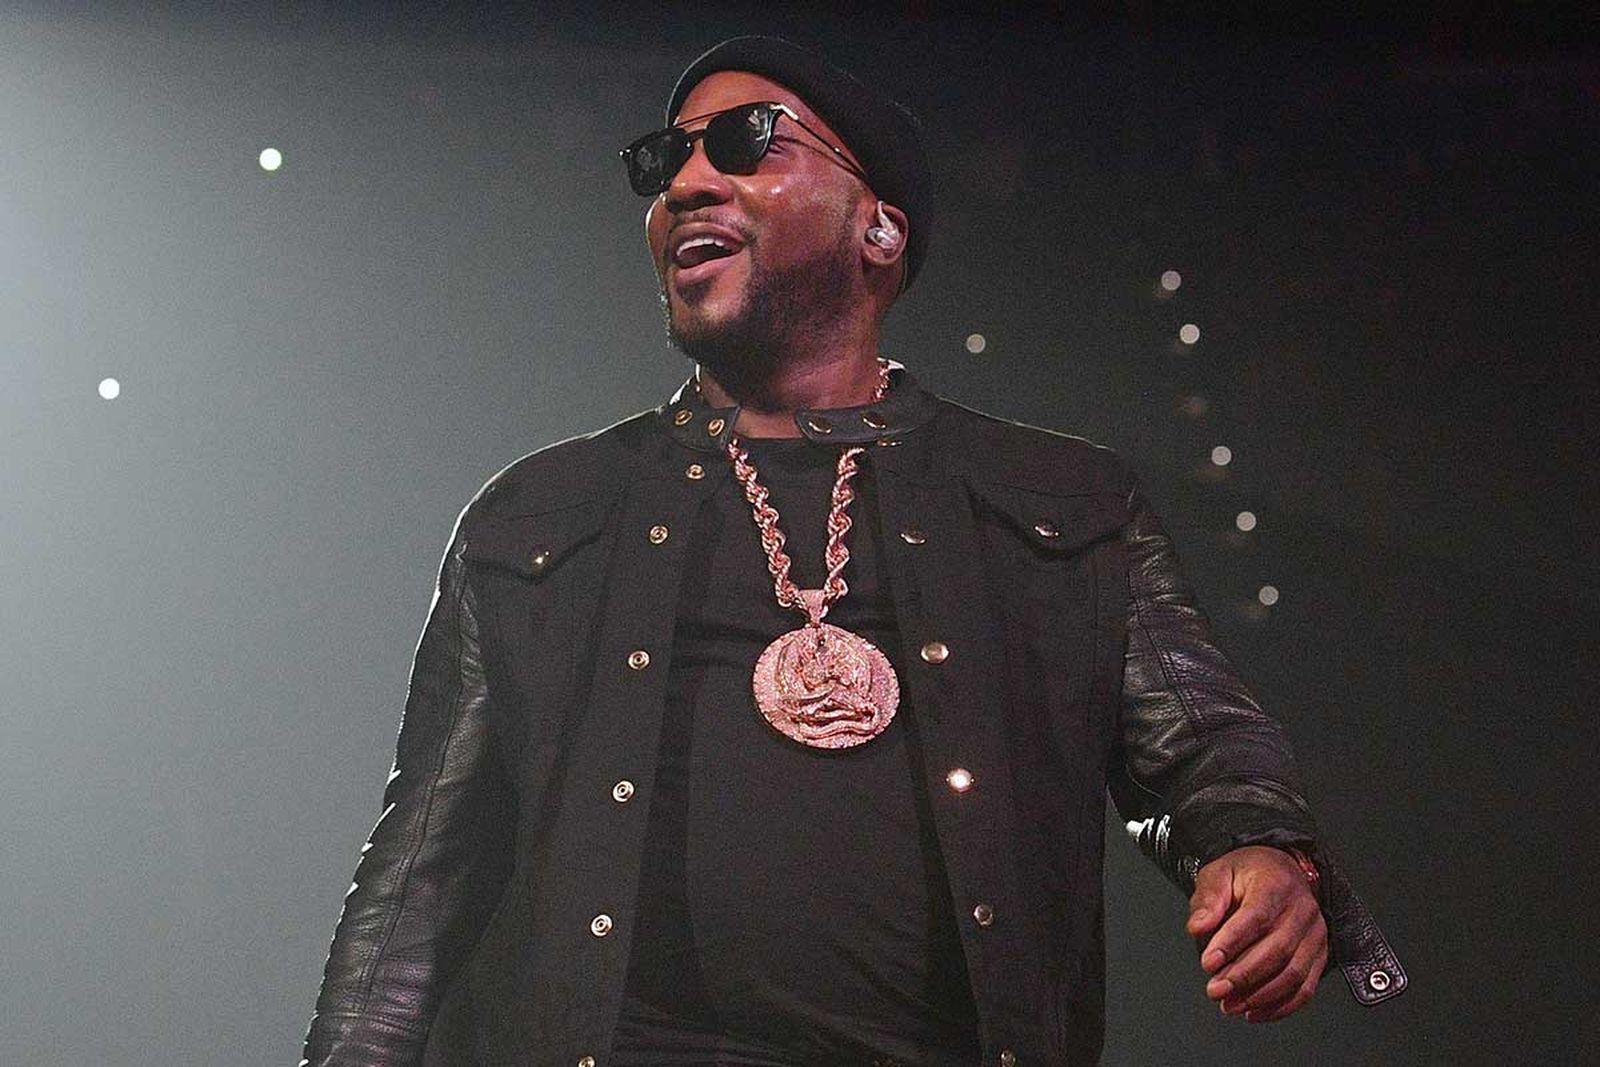 Jeezy performing live